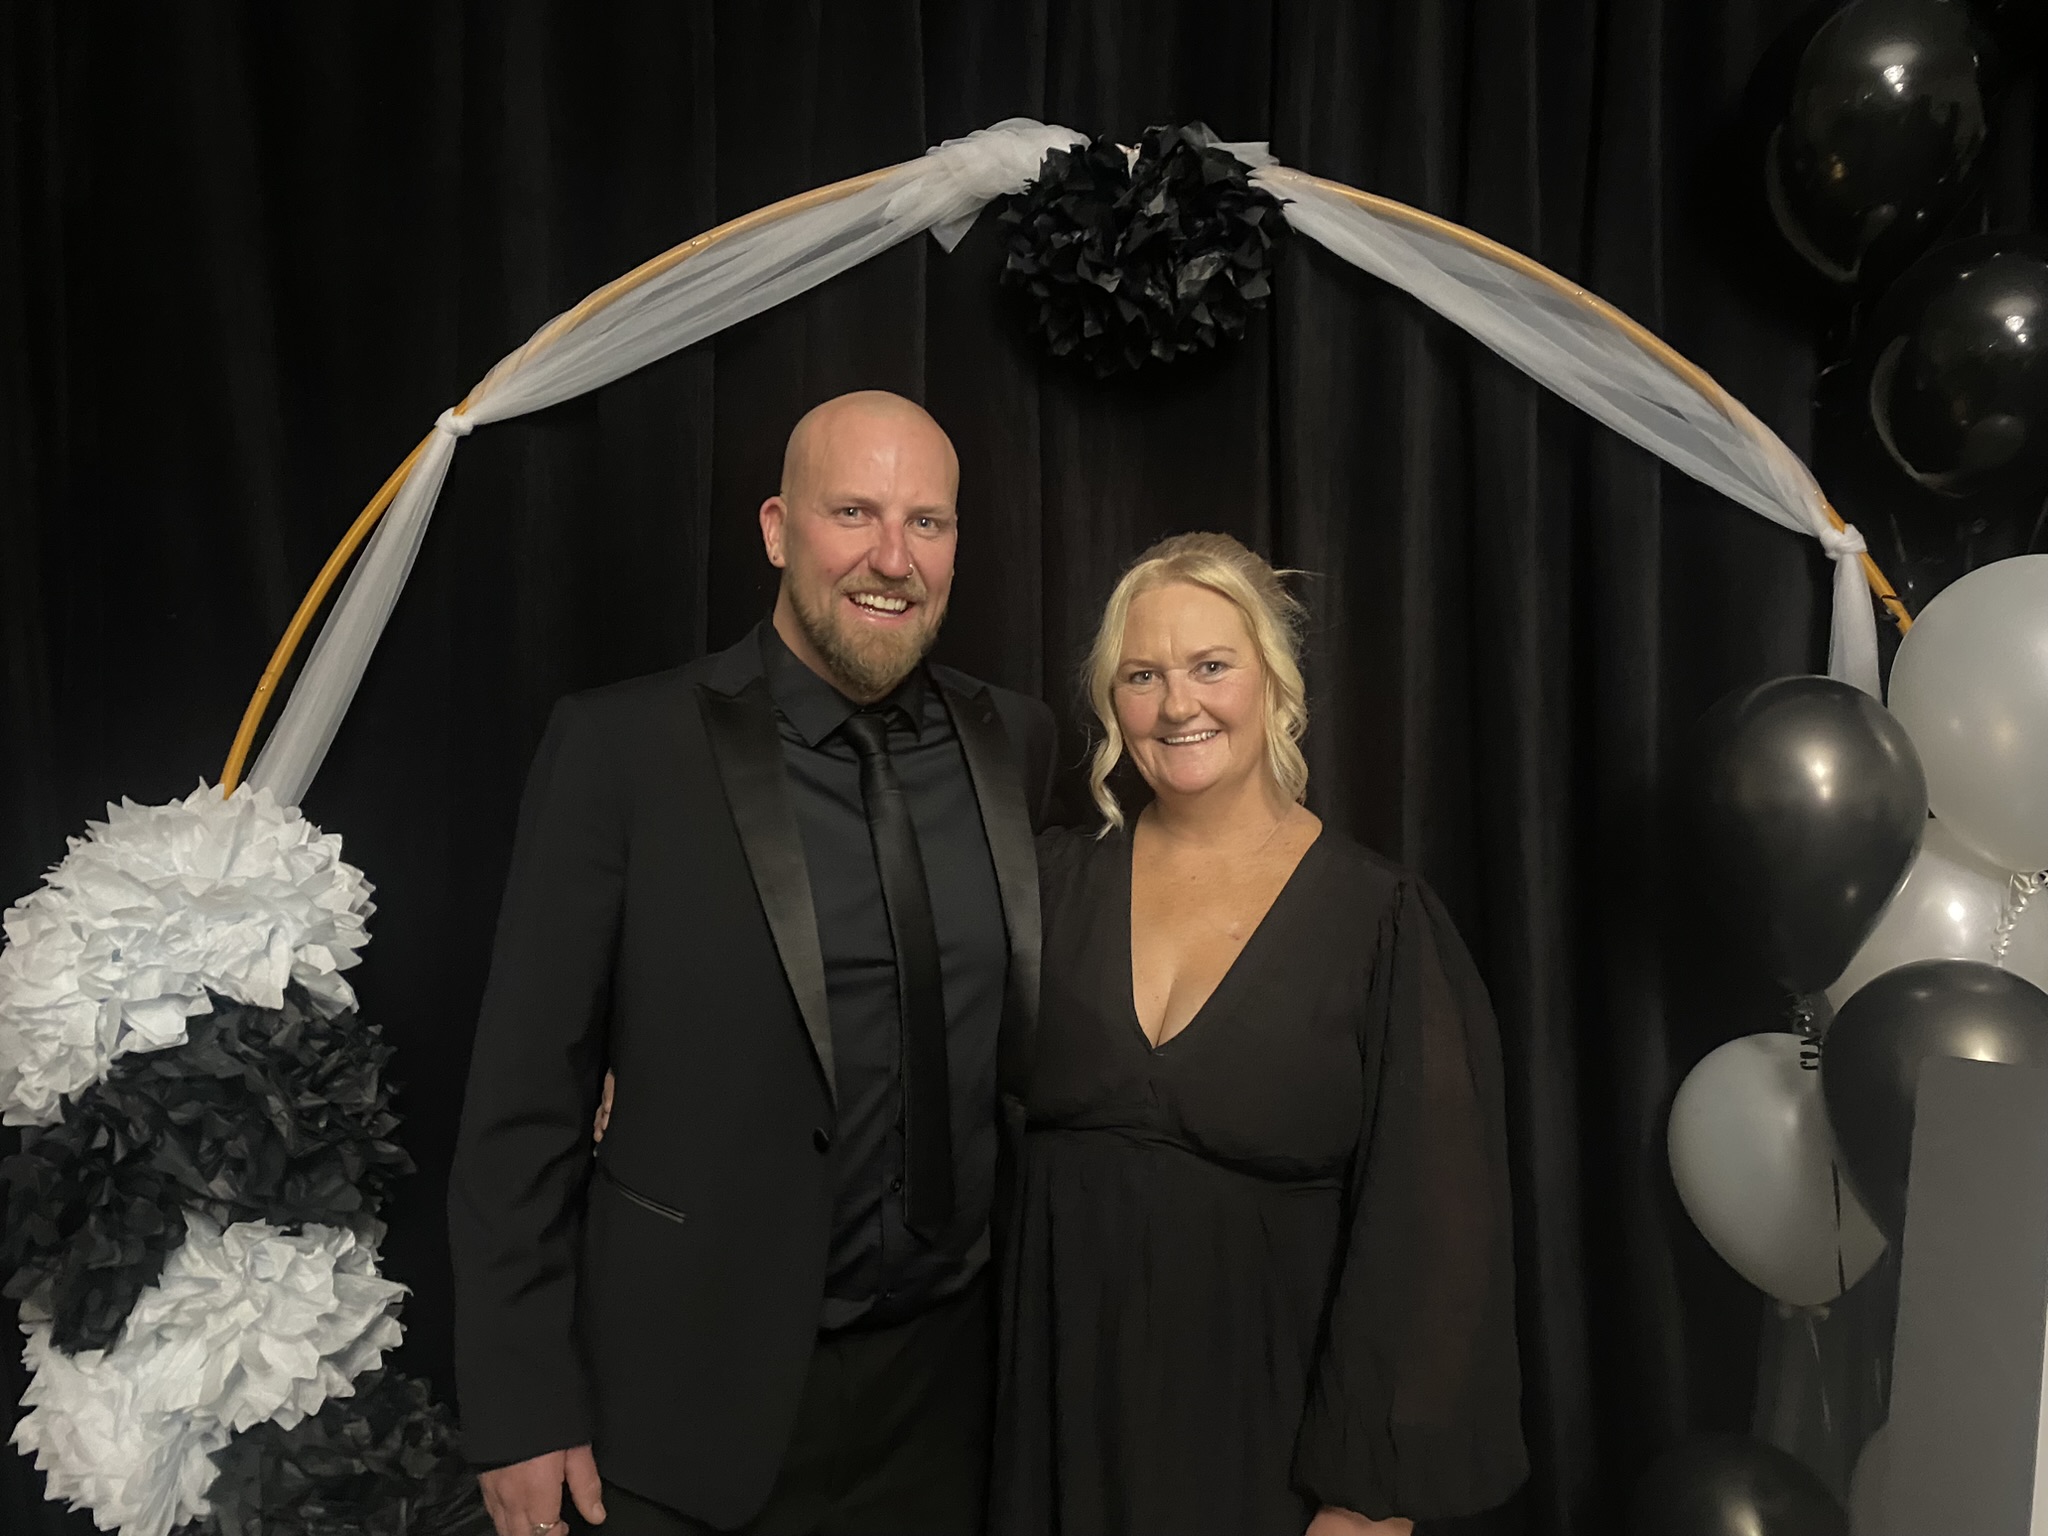 Community Champions - The 3rd Annual Wellness Ball for Cancer Wellness Centre